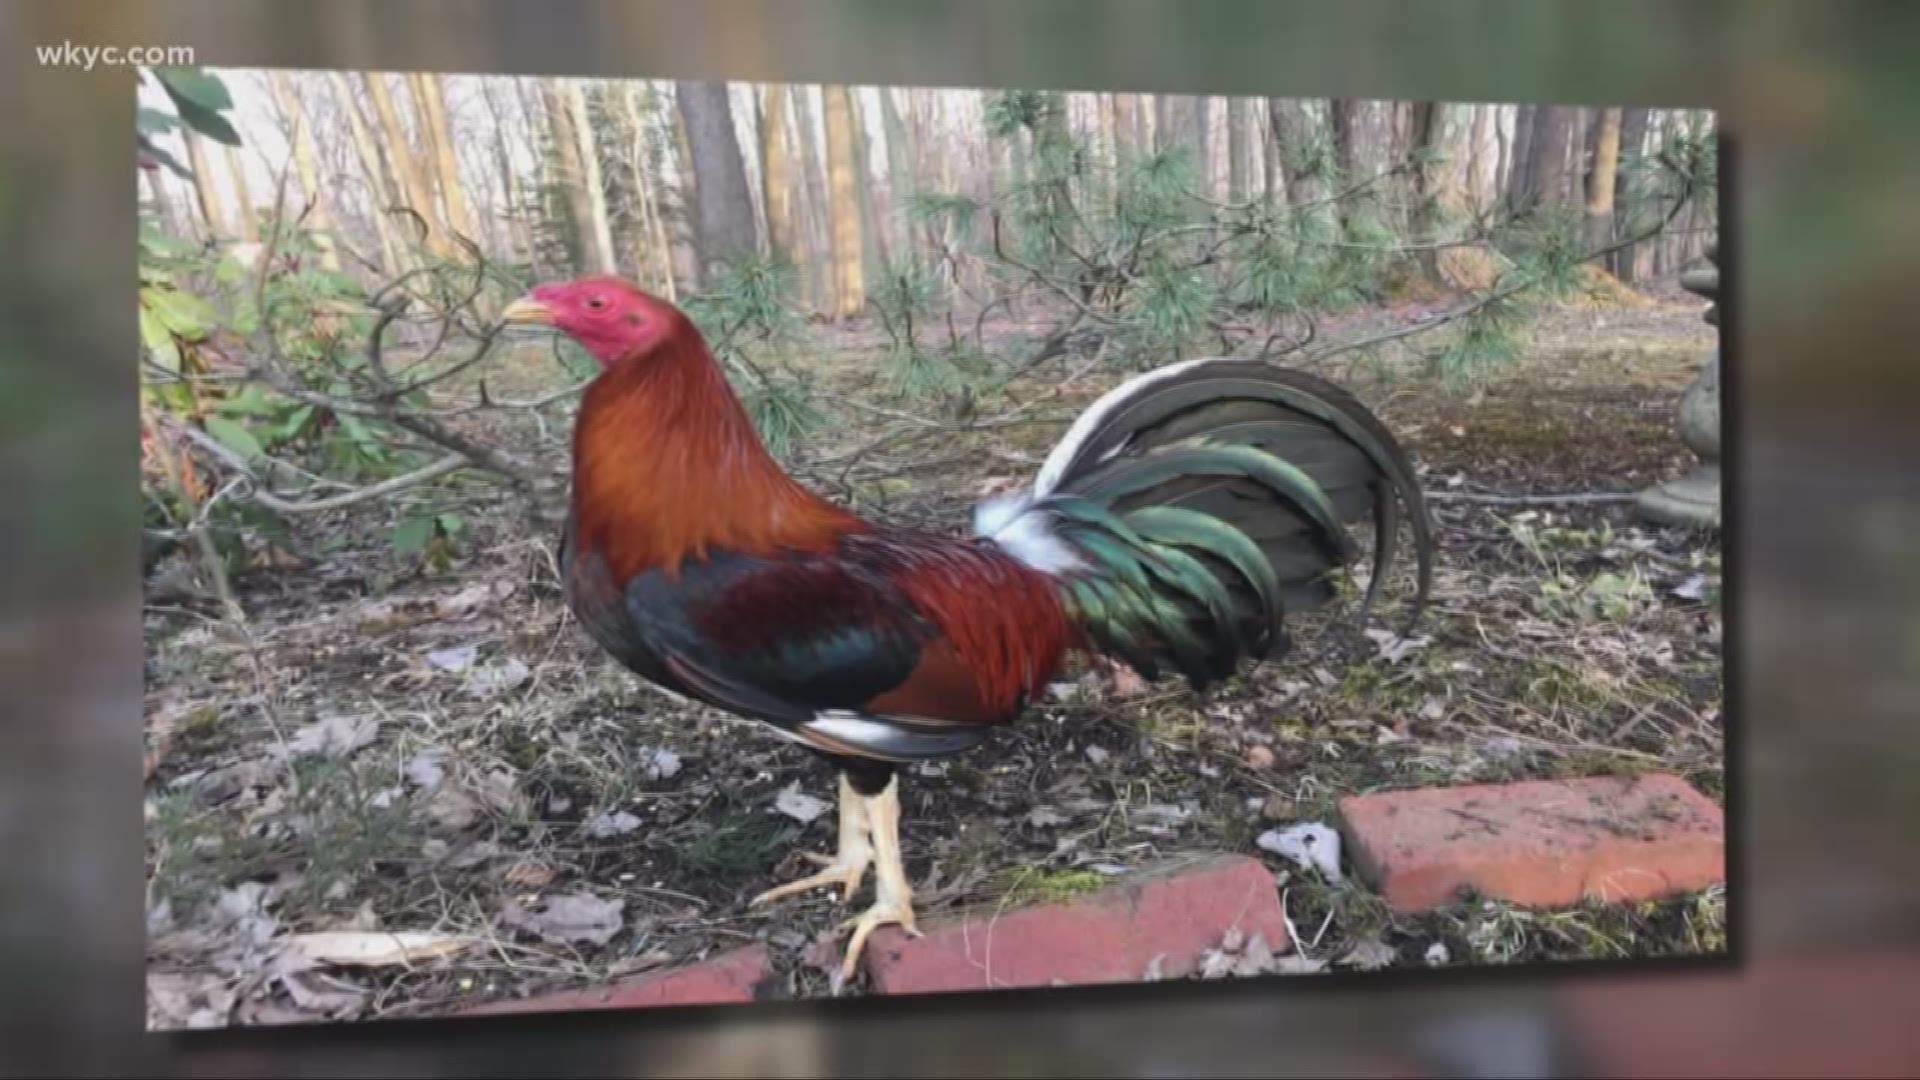 June 12, 2019: The rooster was named after 'Guardians of the Galaxy' character, proved to live up to his name, guarding a little girl’s trust and his new family. WKYC's Dorsena Drakeford has the story.